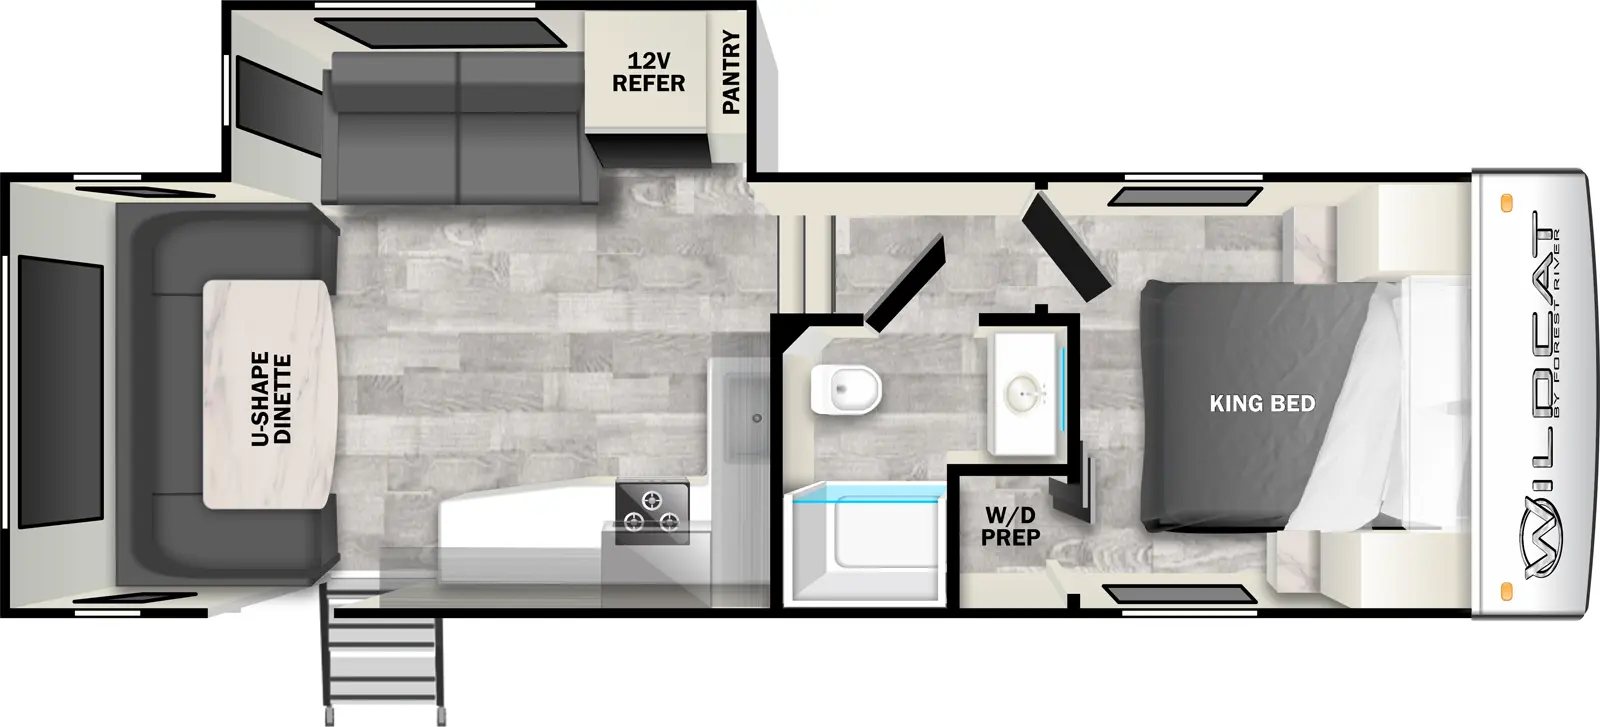 The 26RD has one slideout and one entry. Interior layout front to back: foot-facing king bed with door side washer/dryer prep; door side full bathroom; steps down to main living area; off-door side slideout with pantry, 12V refrigerator, and seating; kitchen counter with sink wraps from inner wall to door side with cooktop, and entry; rear u-shape dinette.